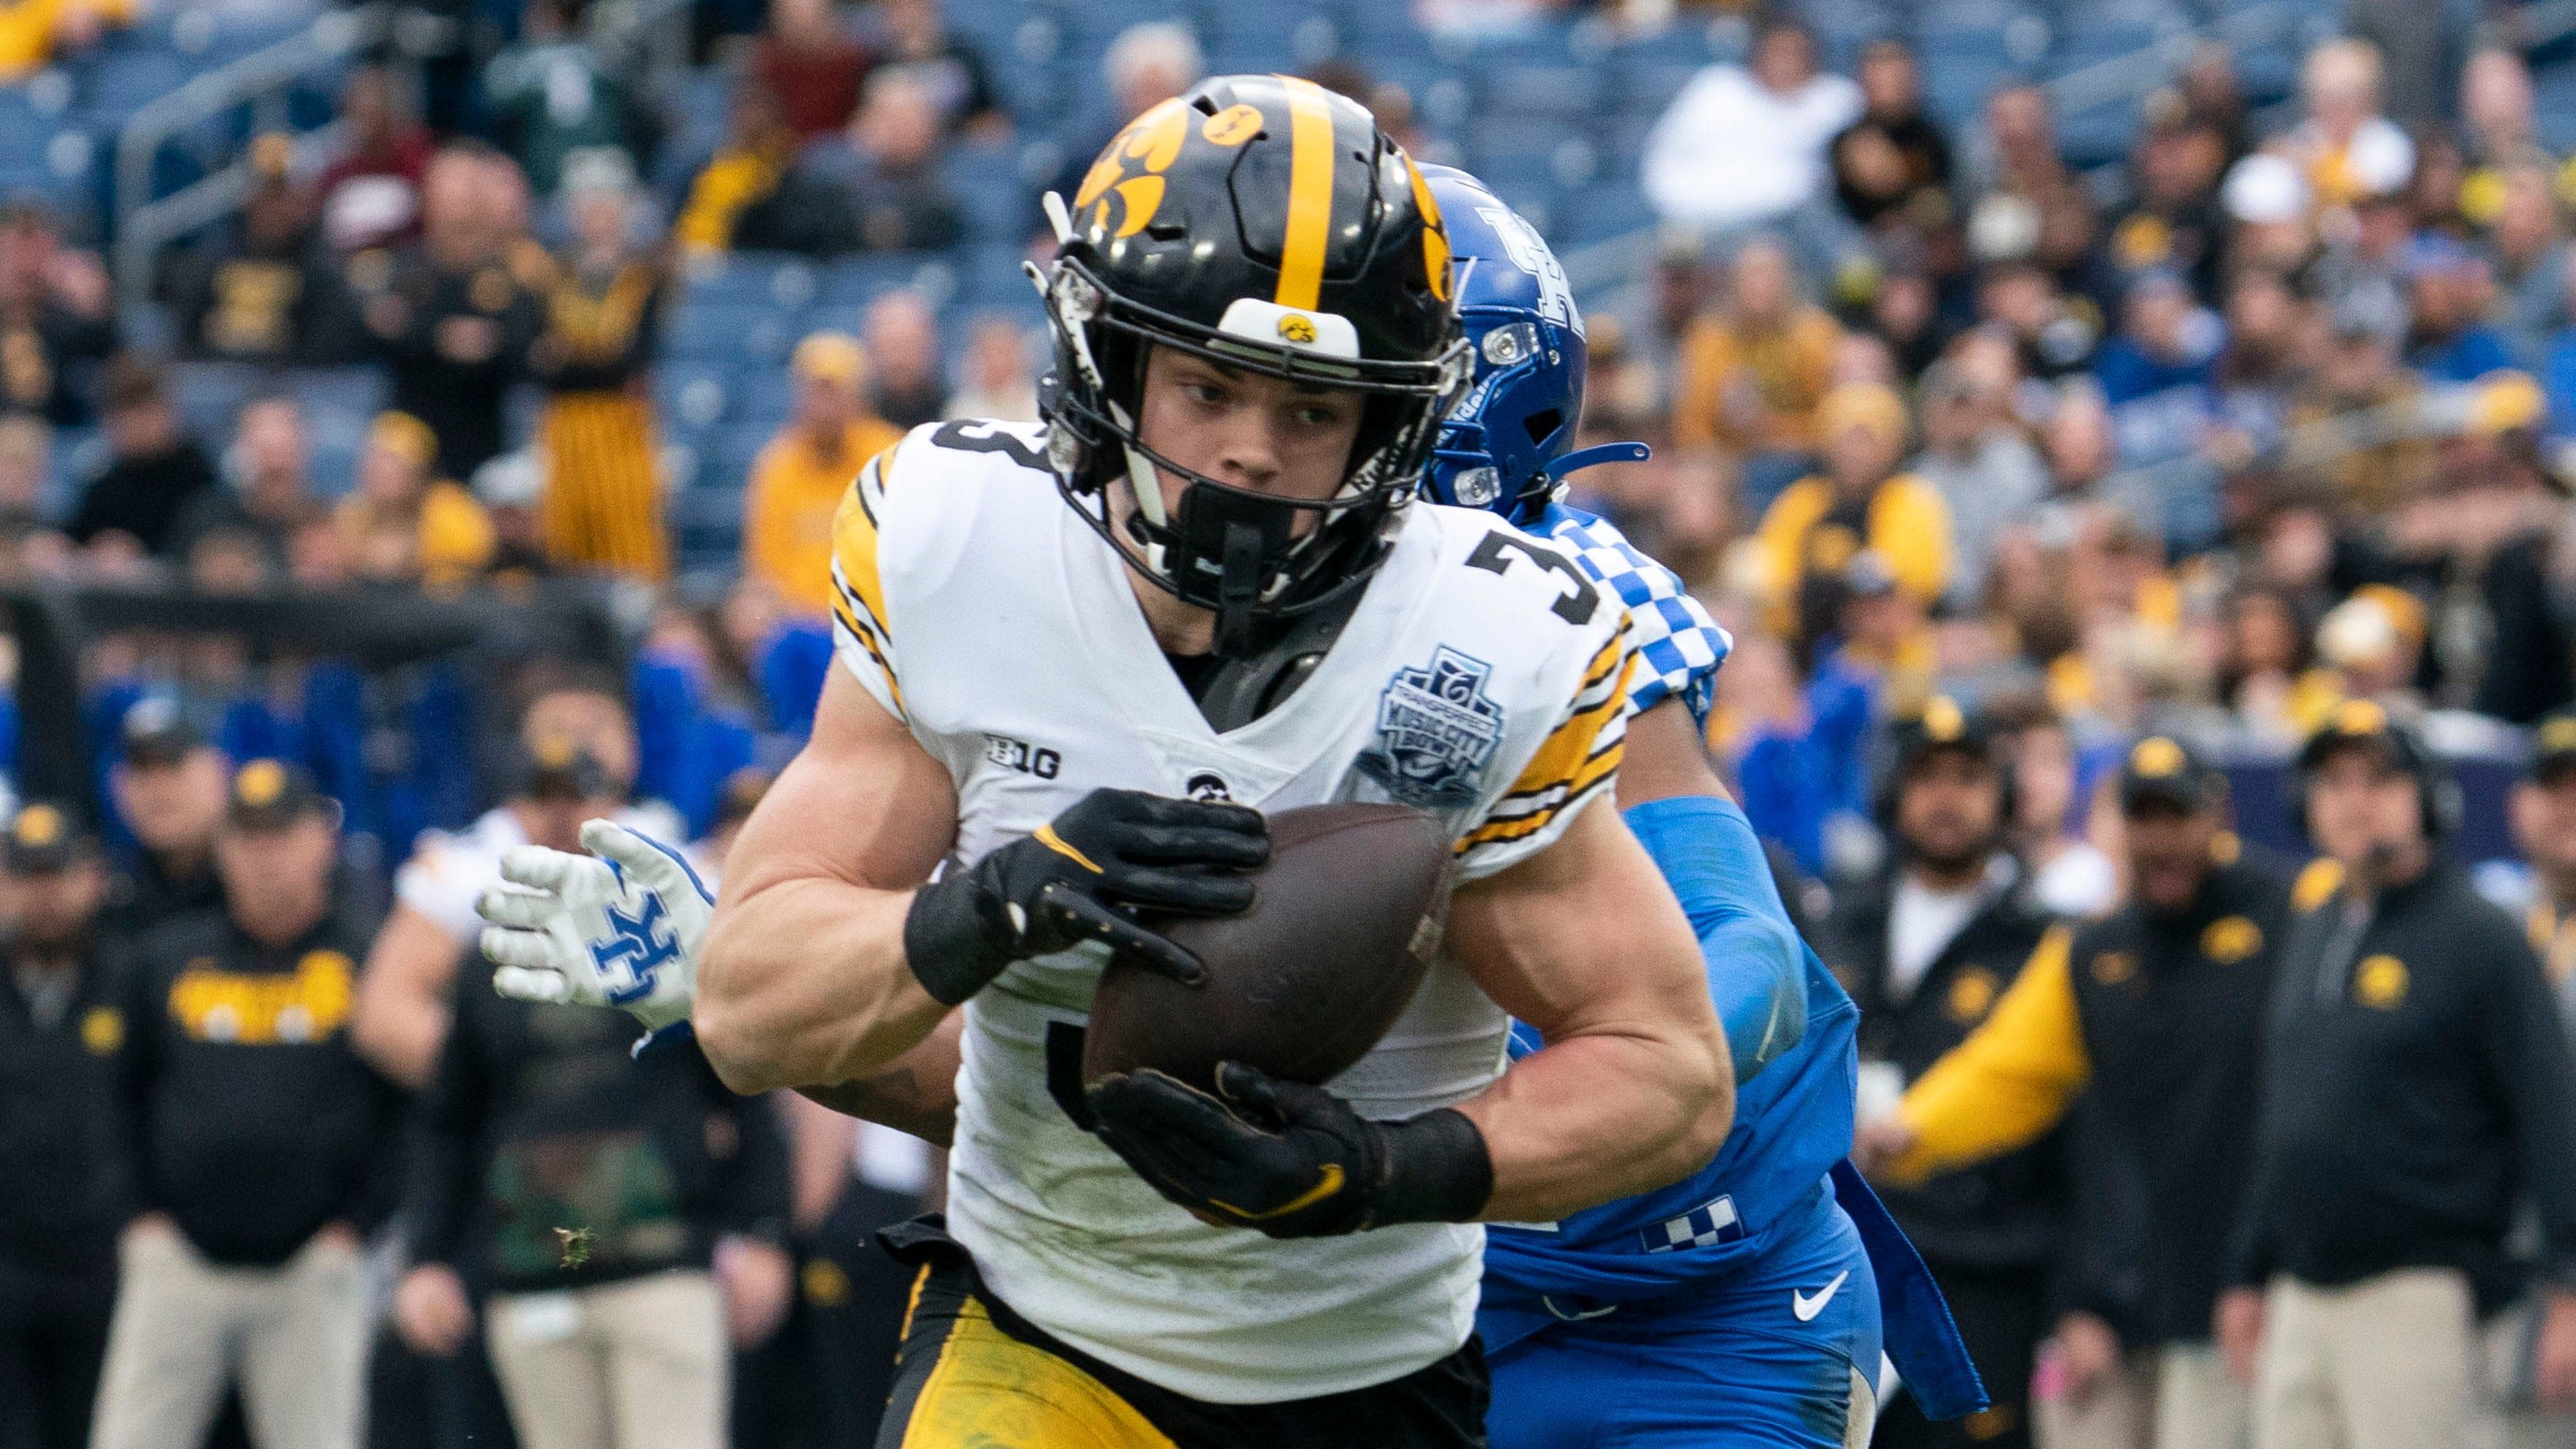 Iowa defensive back Cooper DeJean (3) pulls in an interception for a touchdown over a Kentucky wide receiver